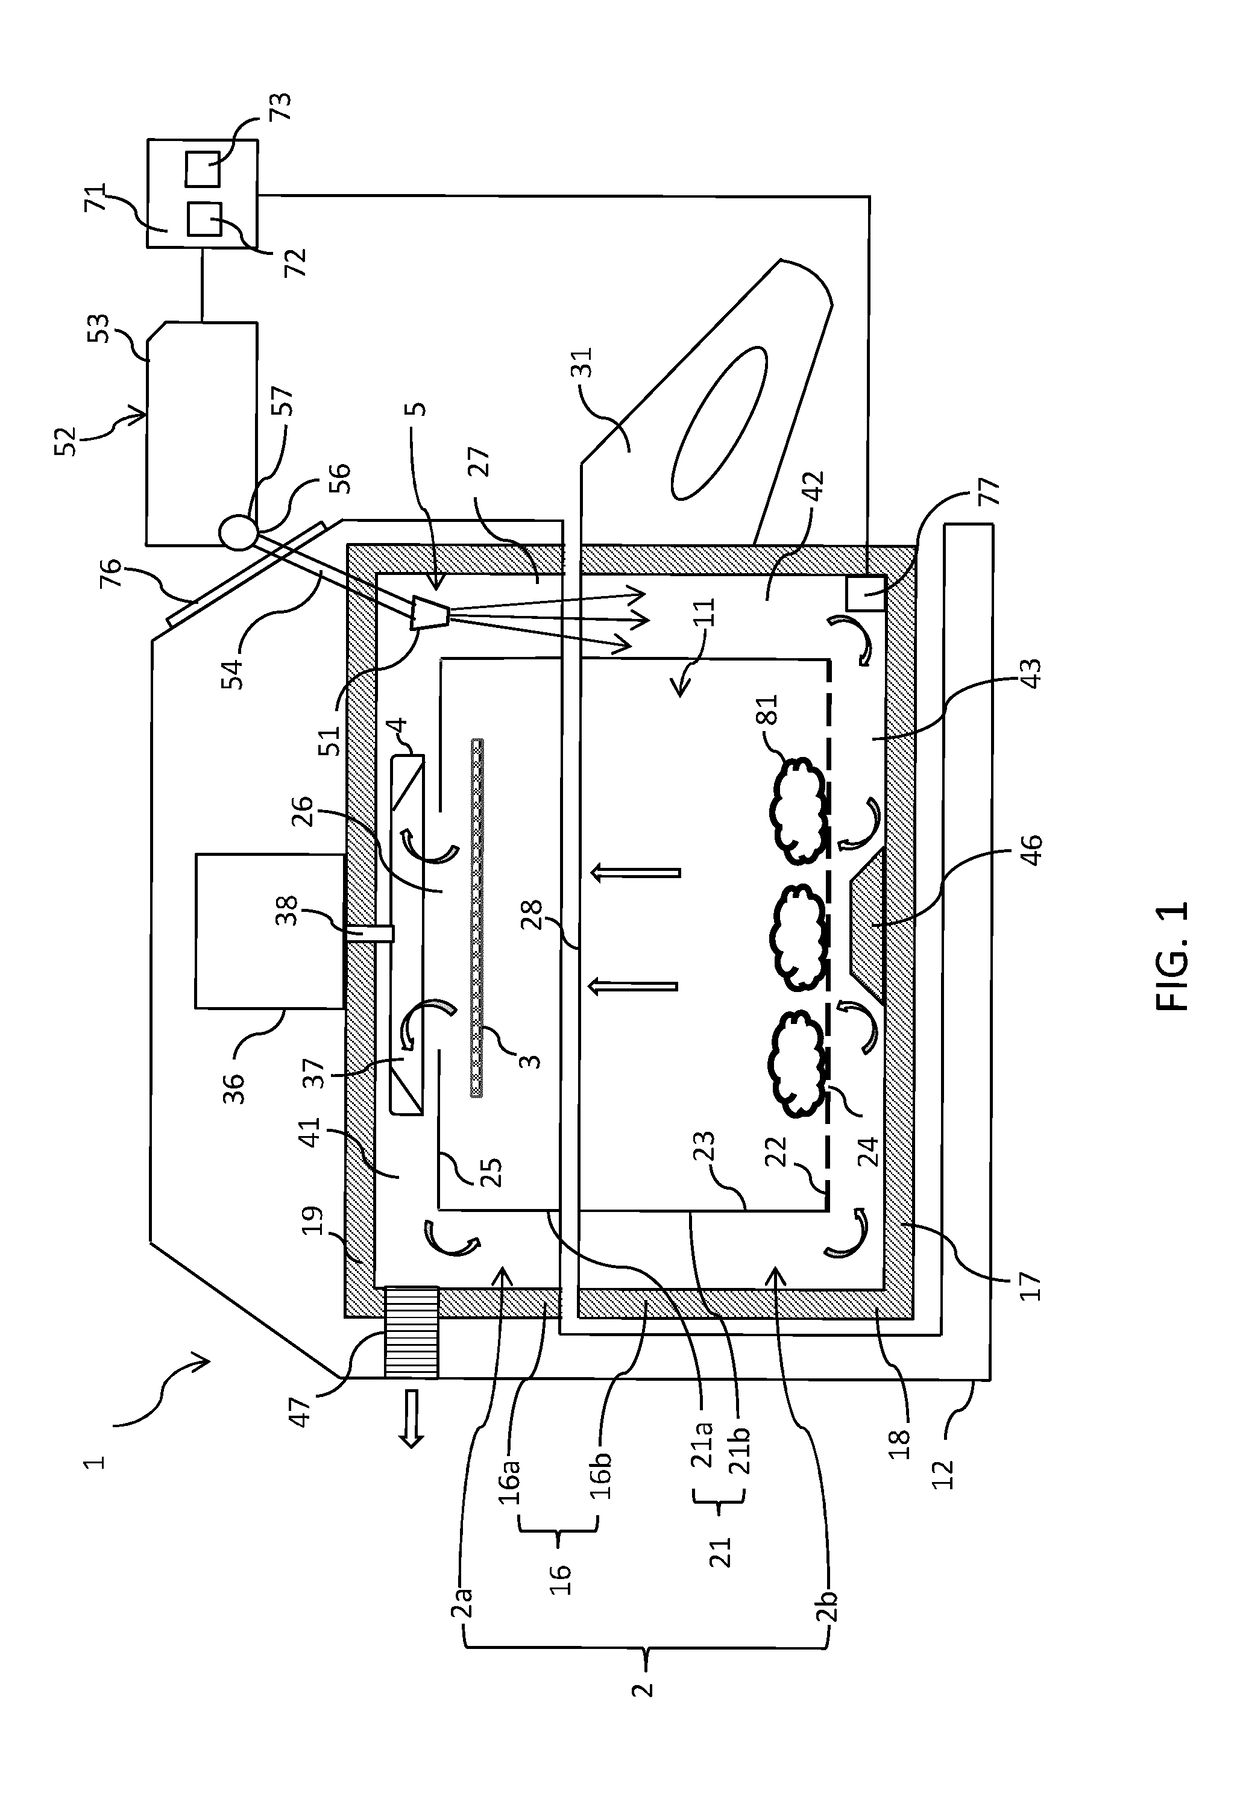 Apparatus and method for preparing food ingredients with hot air and fluid introduced thereinto